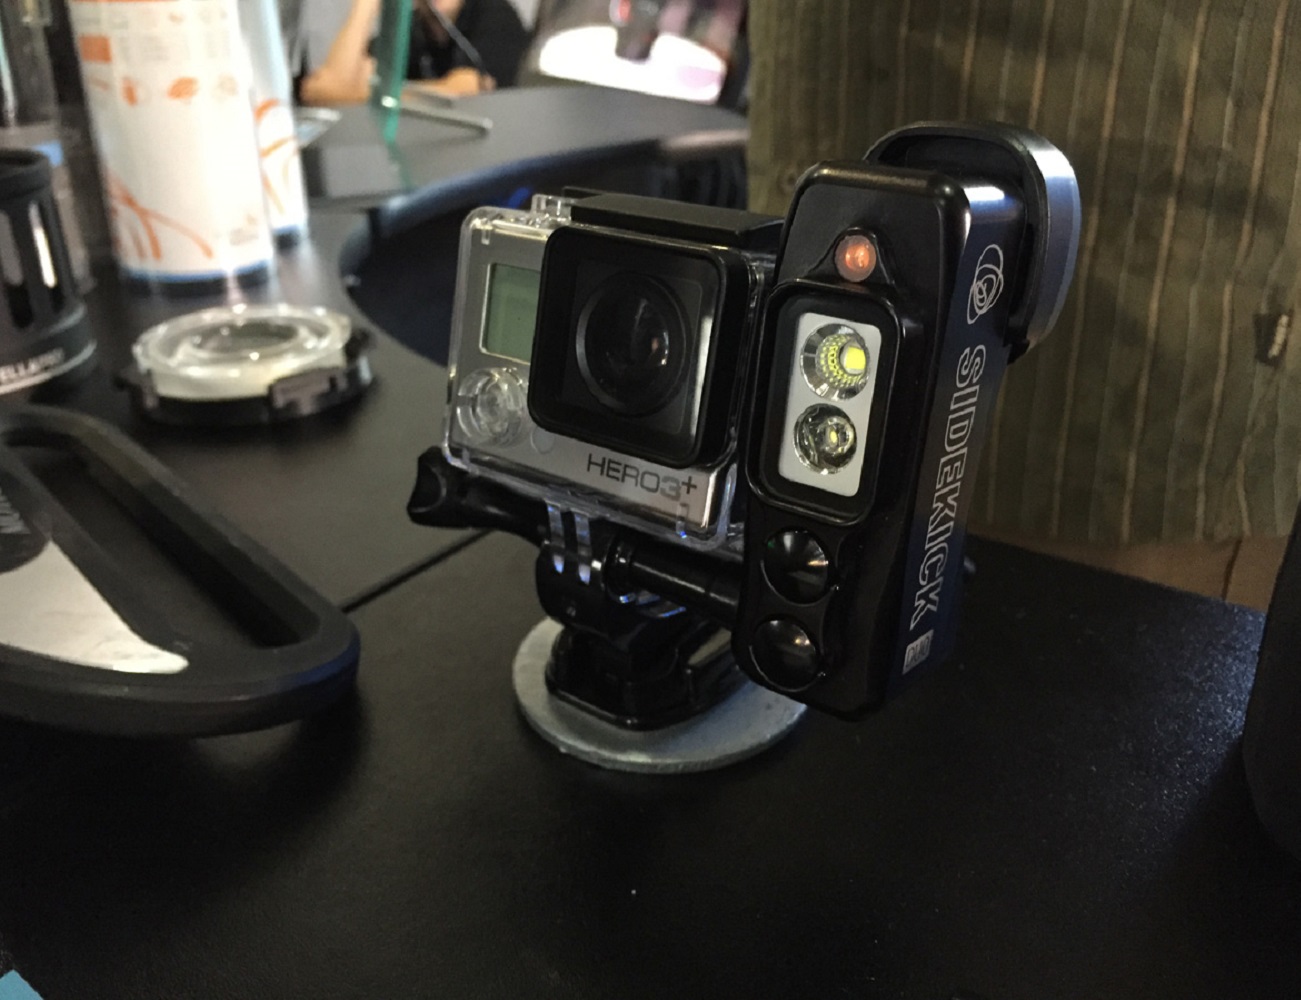 Sidekick - A <em class="algolia-search-highlight">Gopro</em> Light To Capture Perfect Imagery At Night